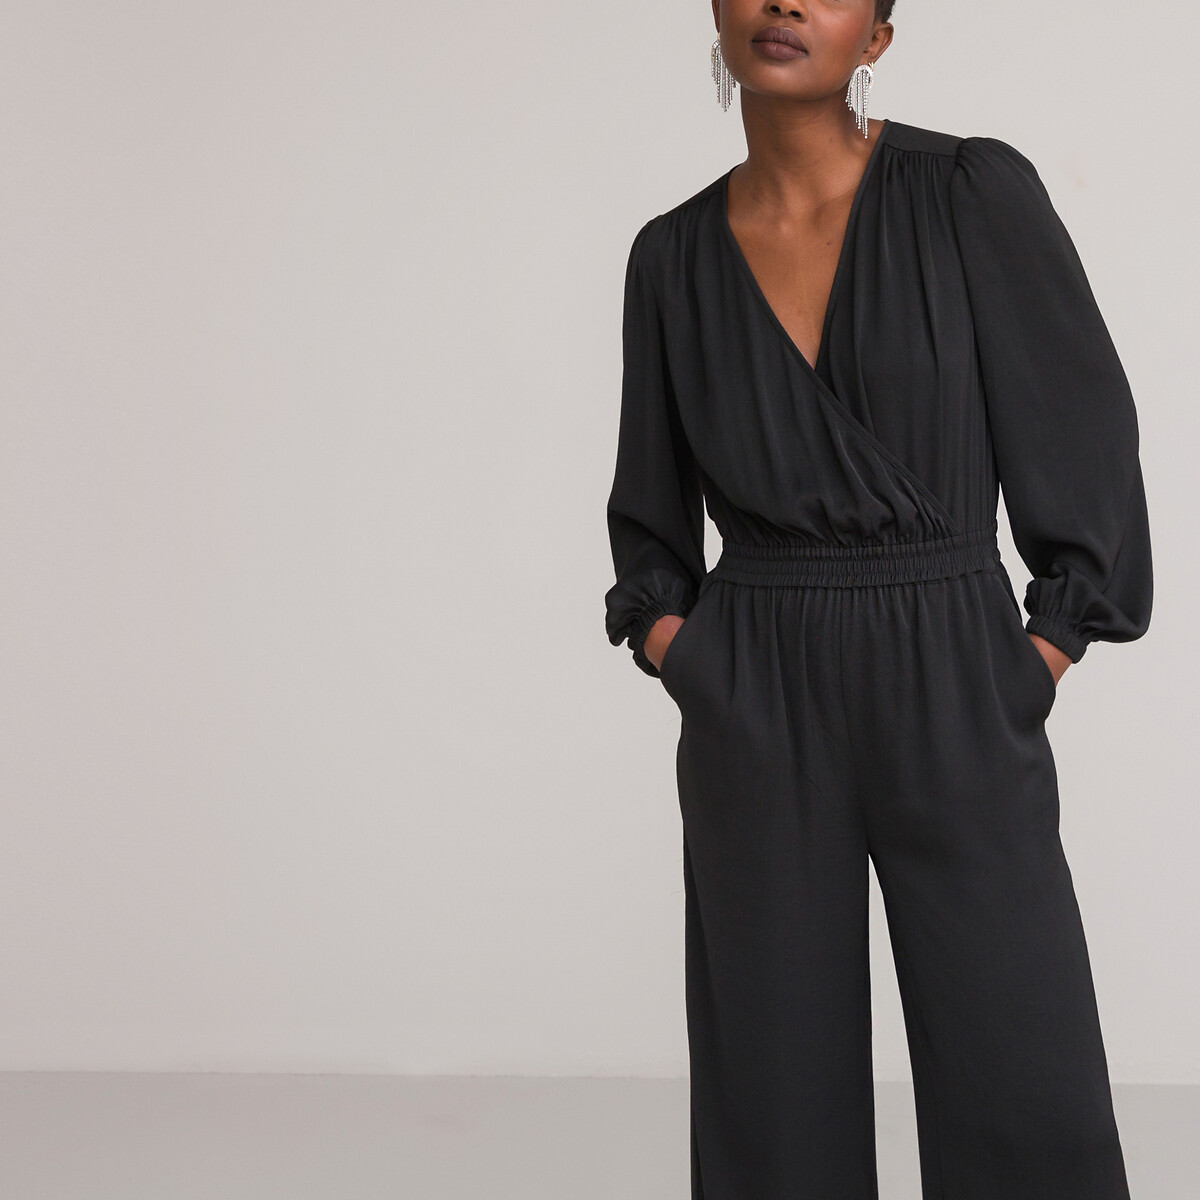 Recycled Satin Jumpsuit with Puff Sleeves, Length 31.5″